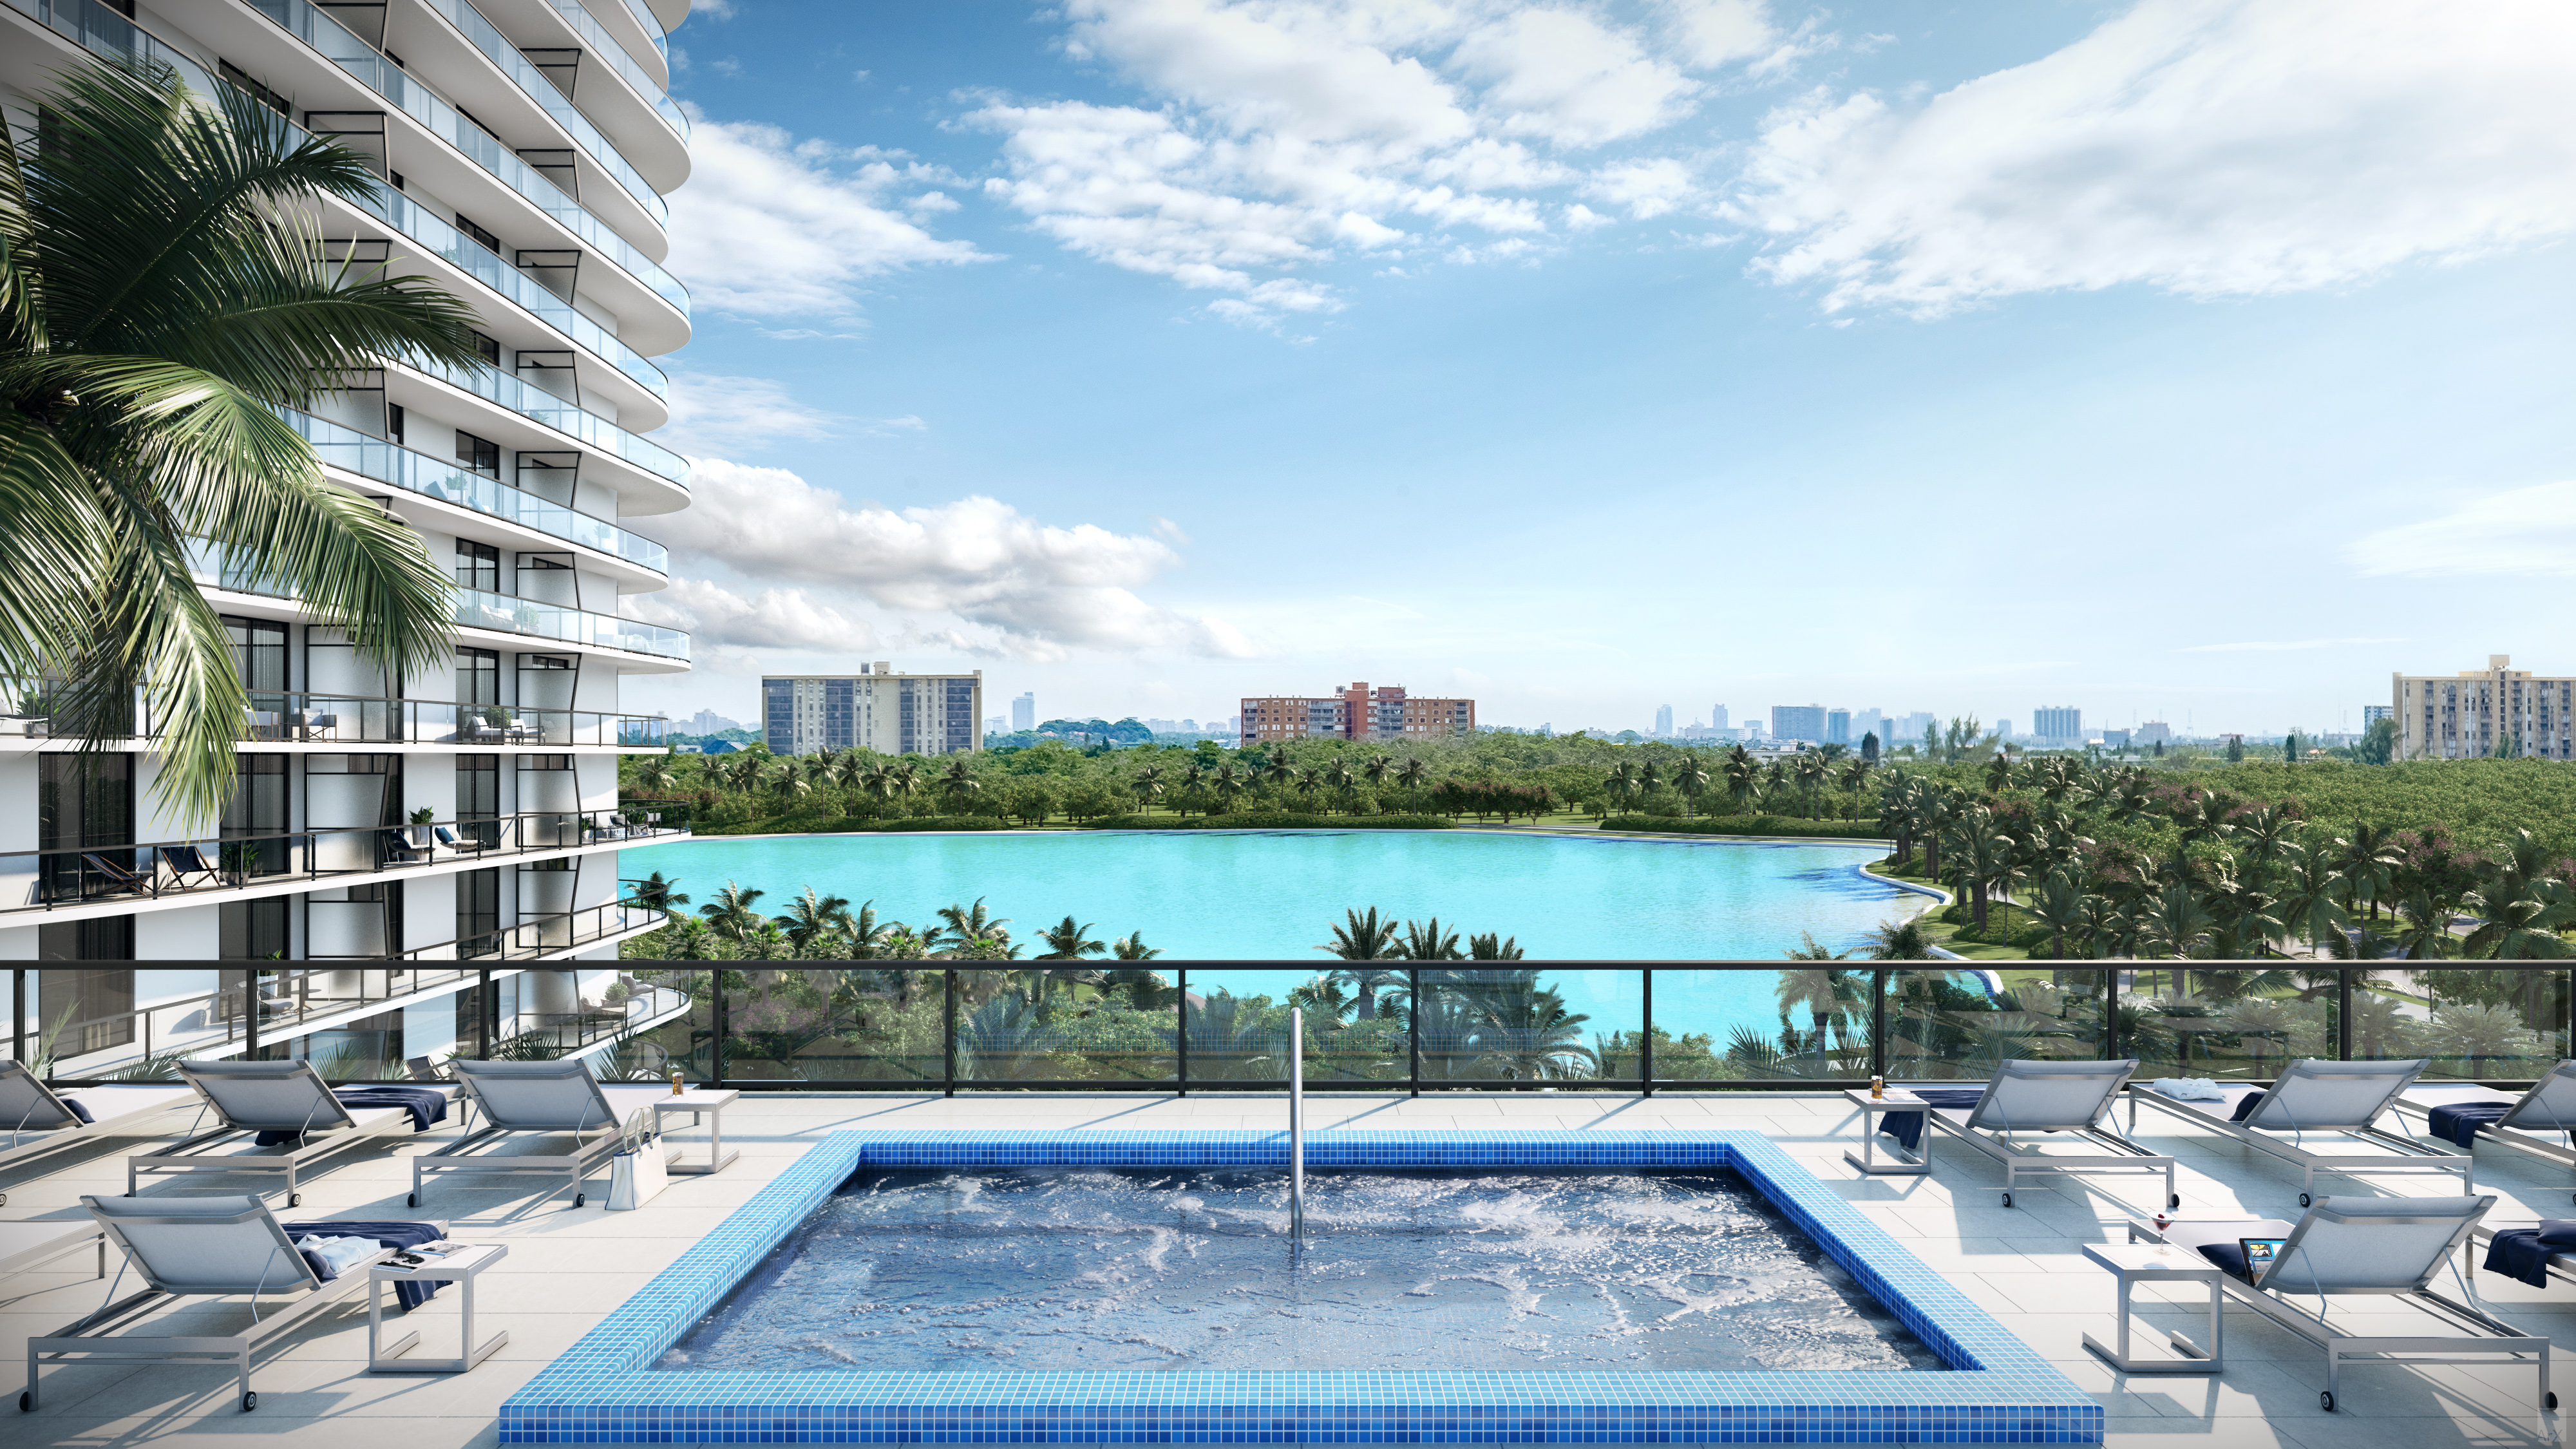 The elevated pool deck at Solé Mia will have a view of South Florida's first Crystal Lagoon